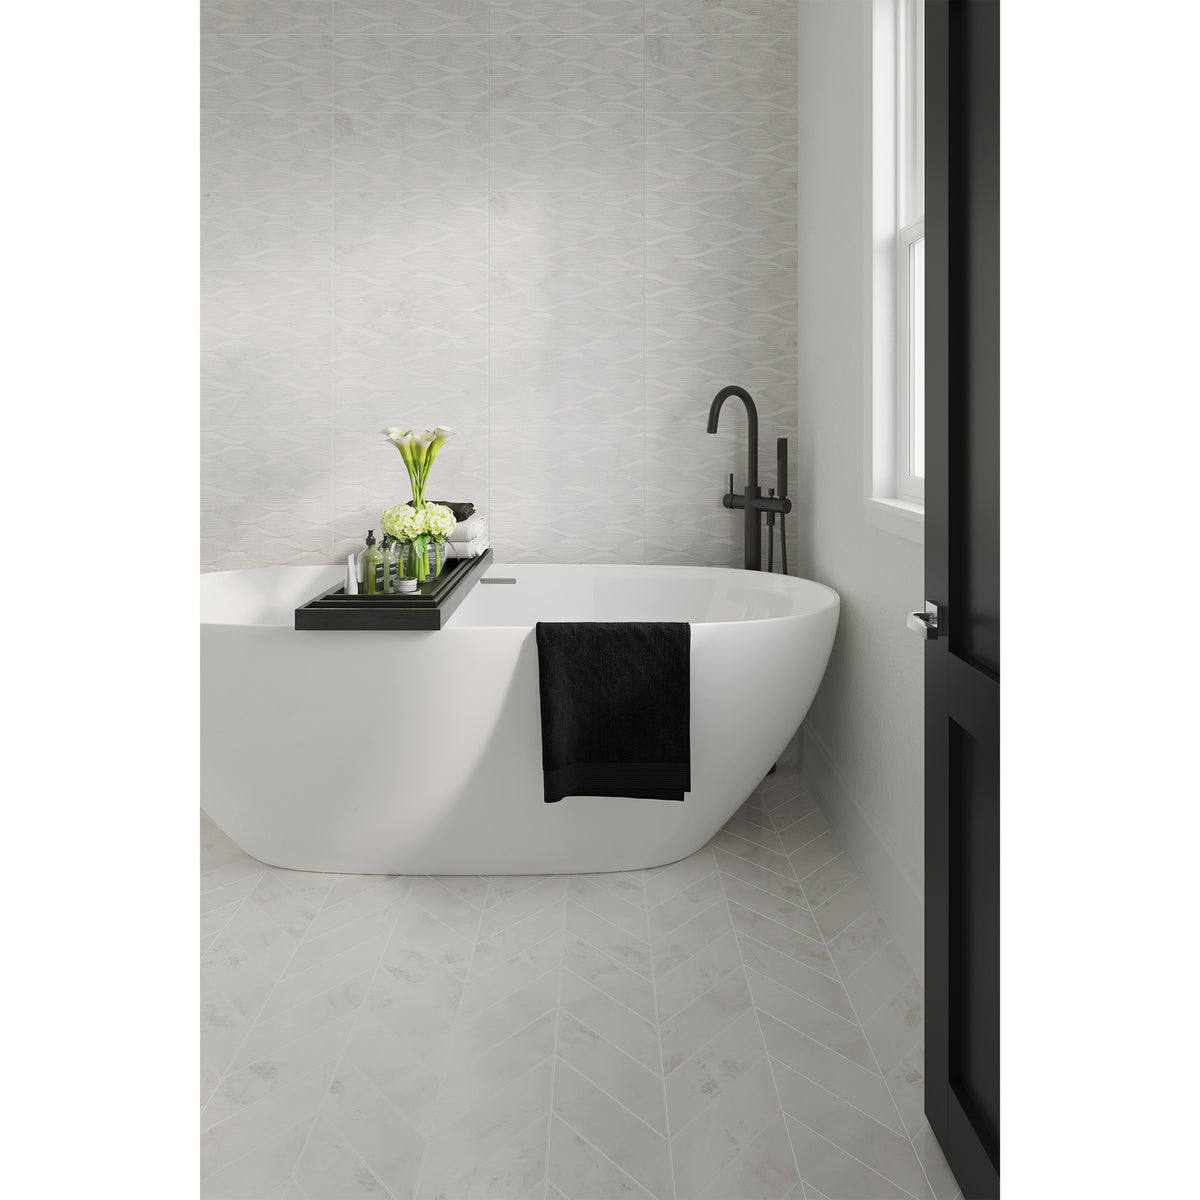 Canoe shown in Danby Marble Main Product Slider View